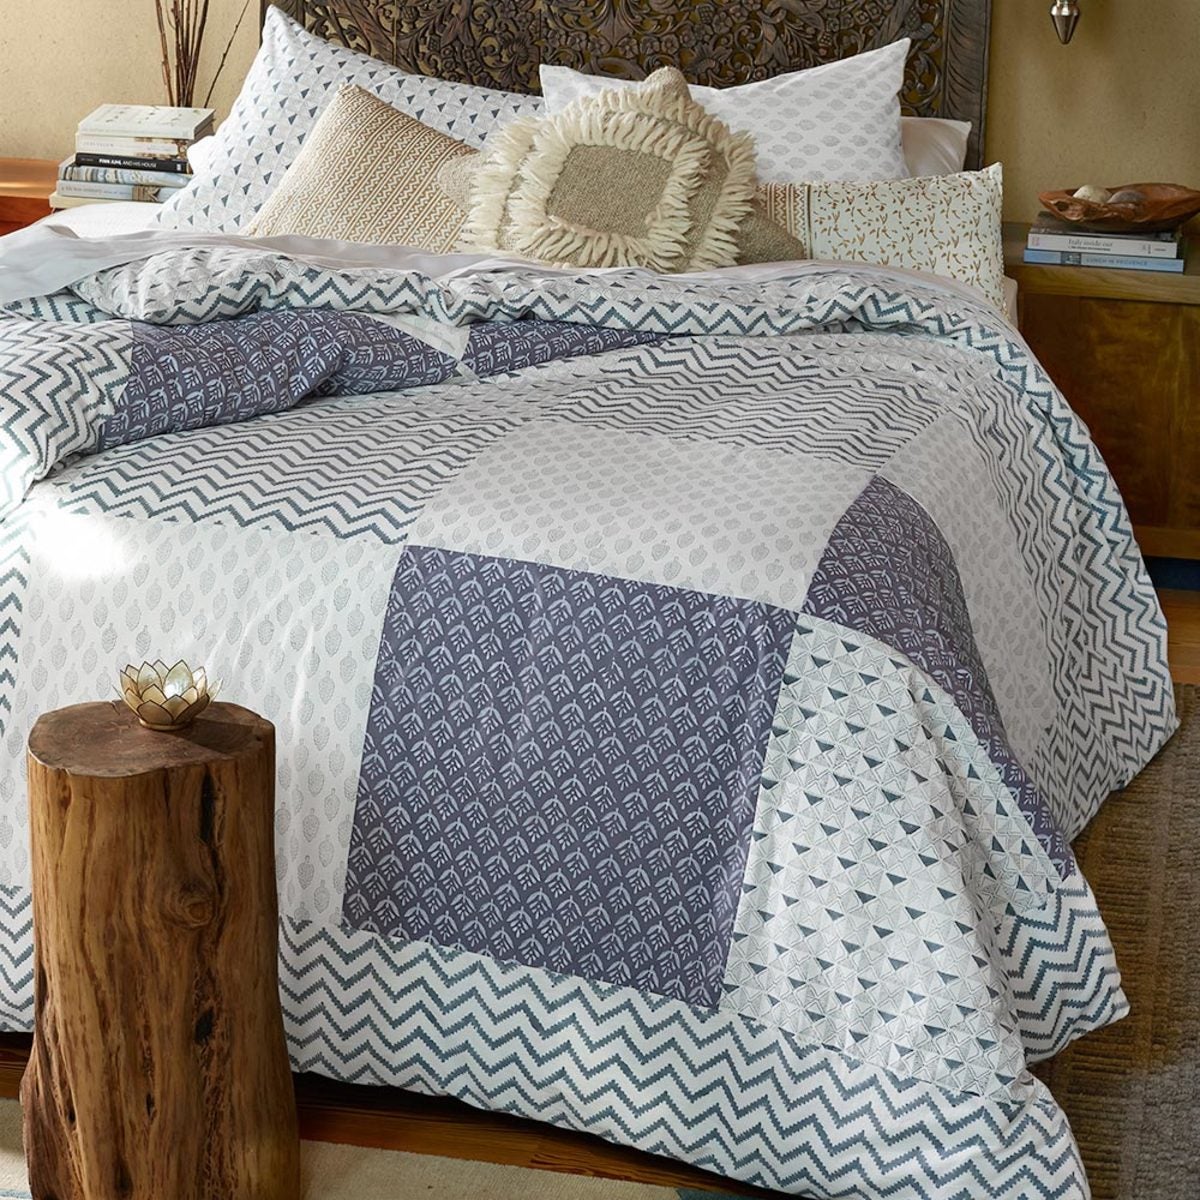 Blue Block-Printed Patchwork Mix Duvet Cover & Two King Shams - King